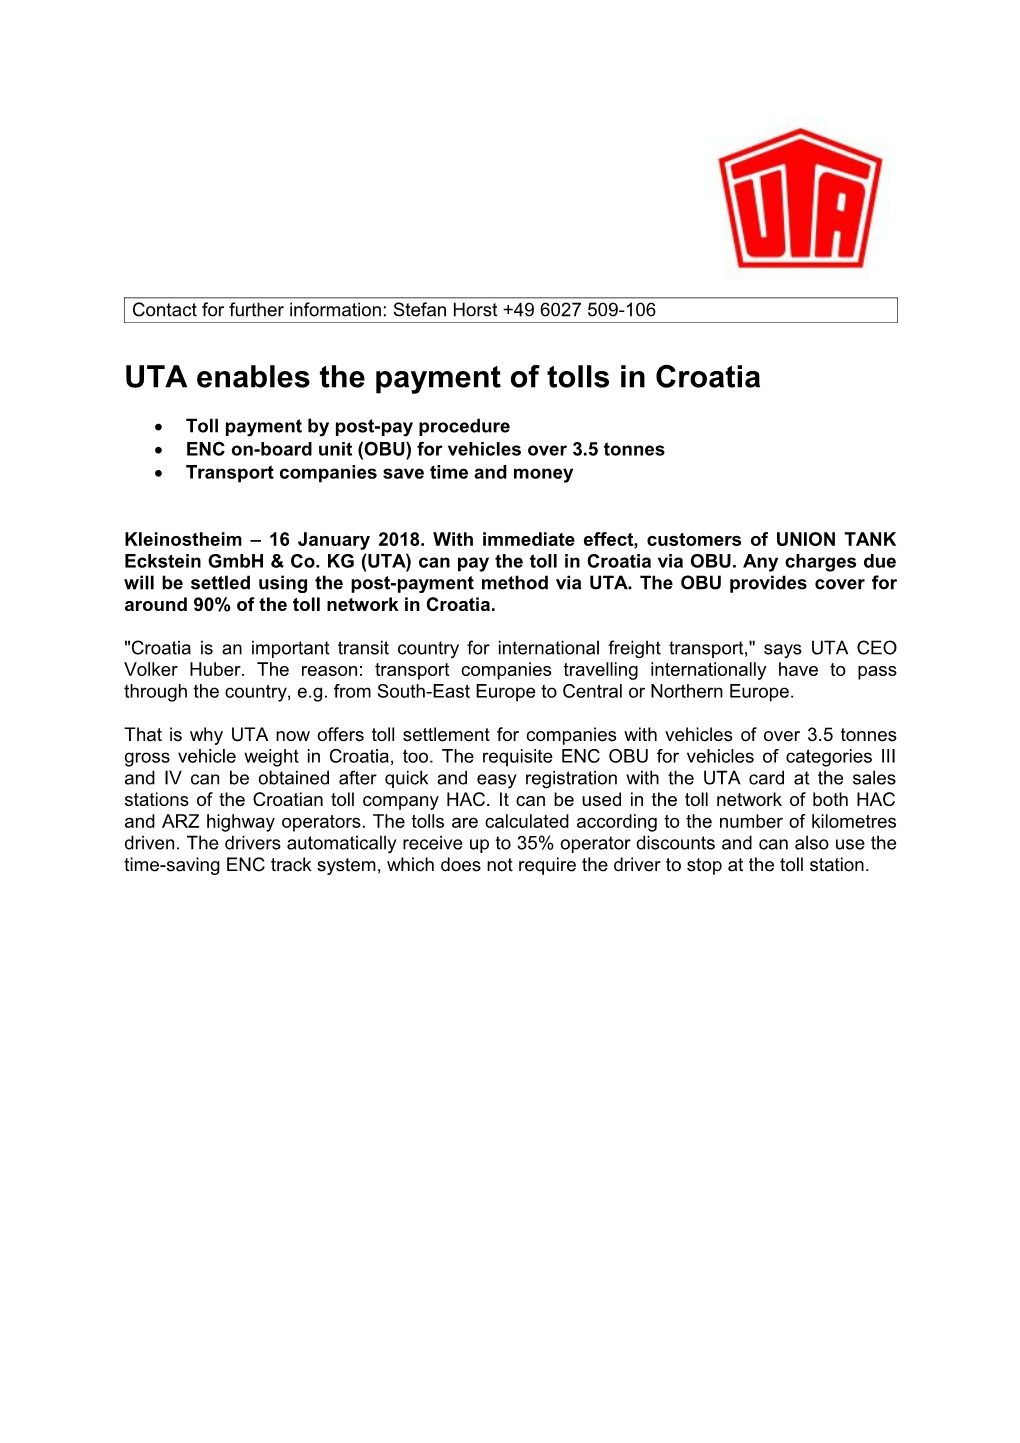 UTA Enables the Payment of Tolls in Croatia